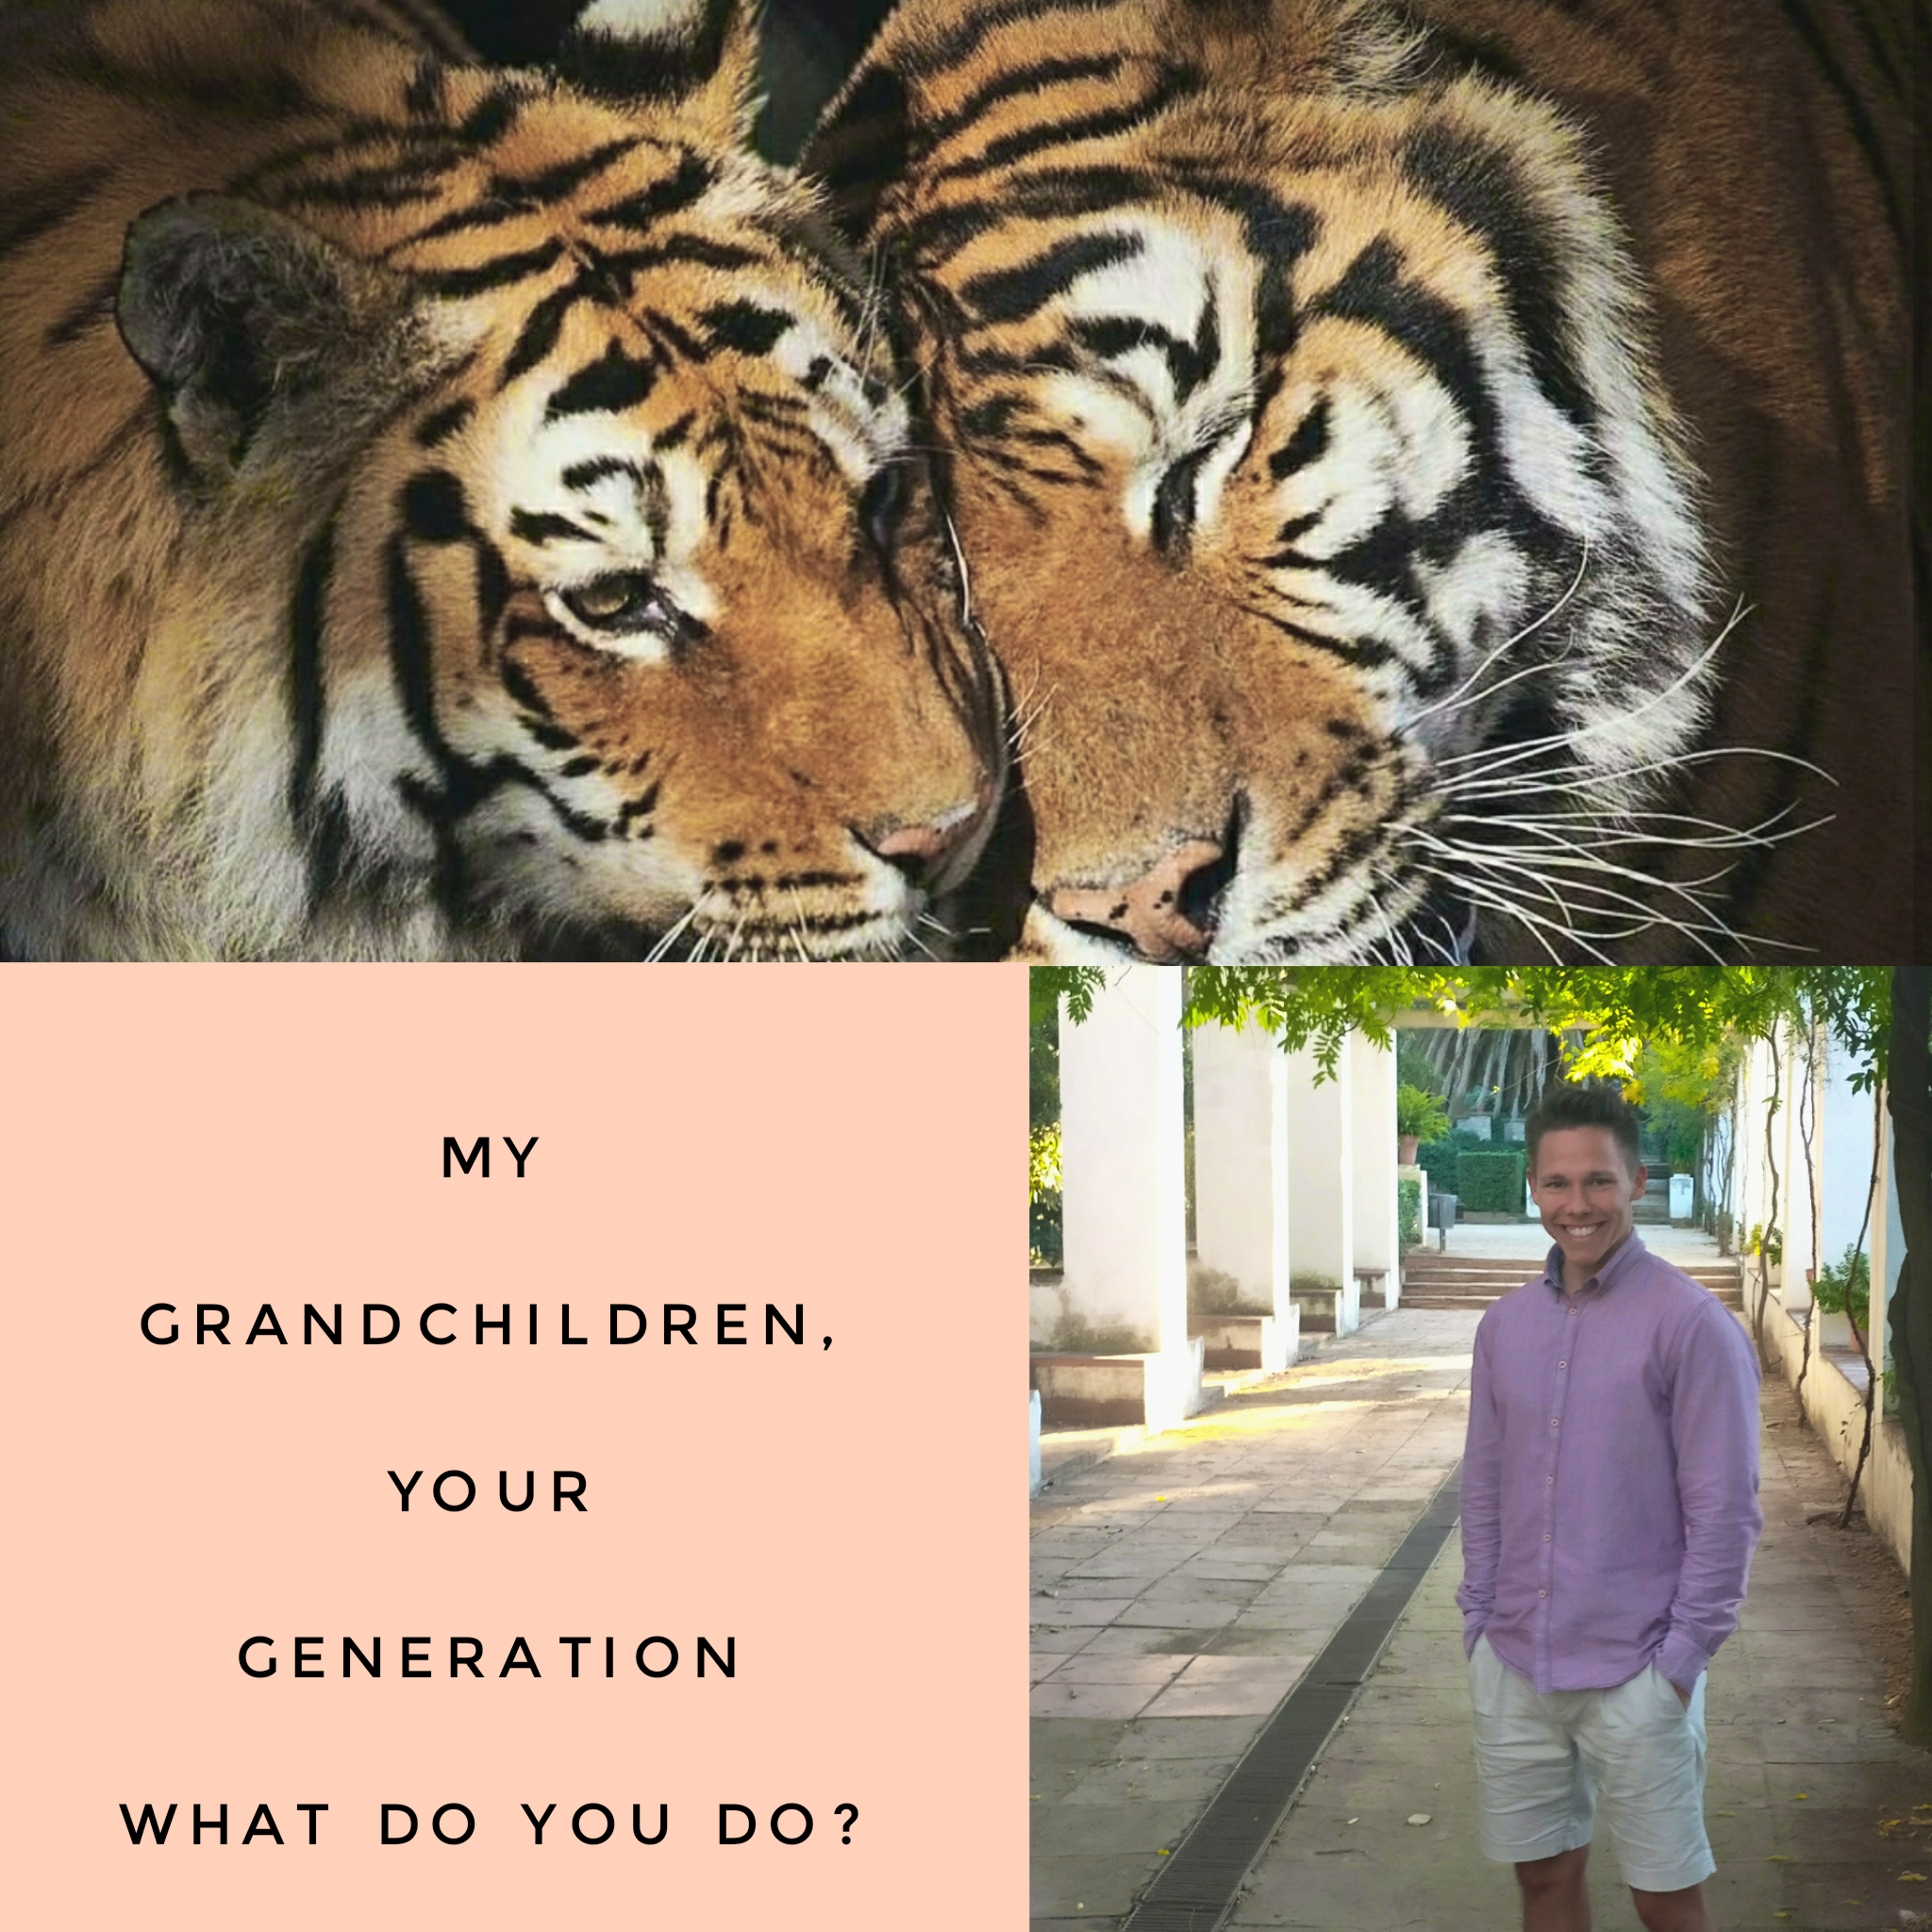 My grandchildren, your generation – What do you do?